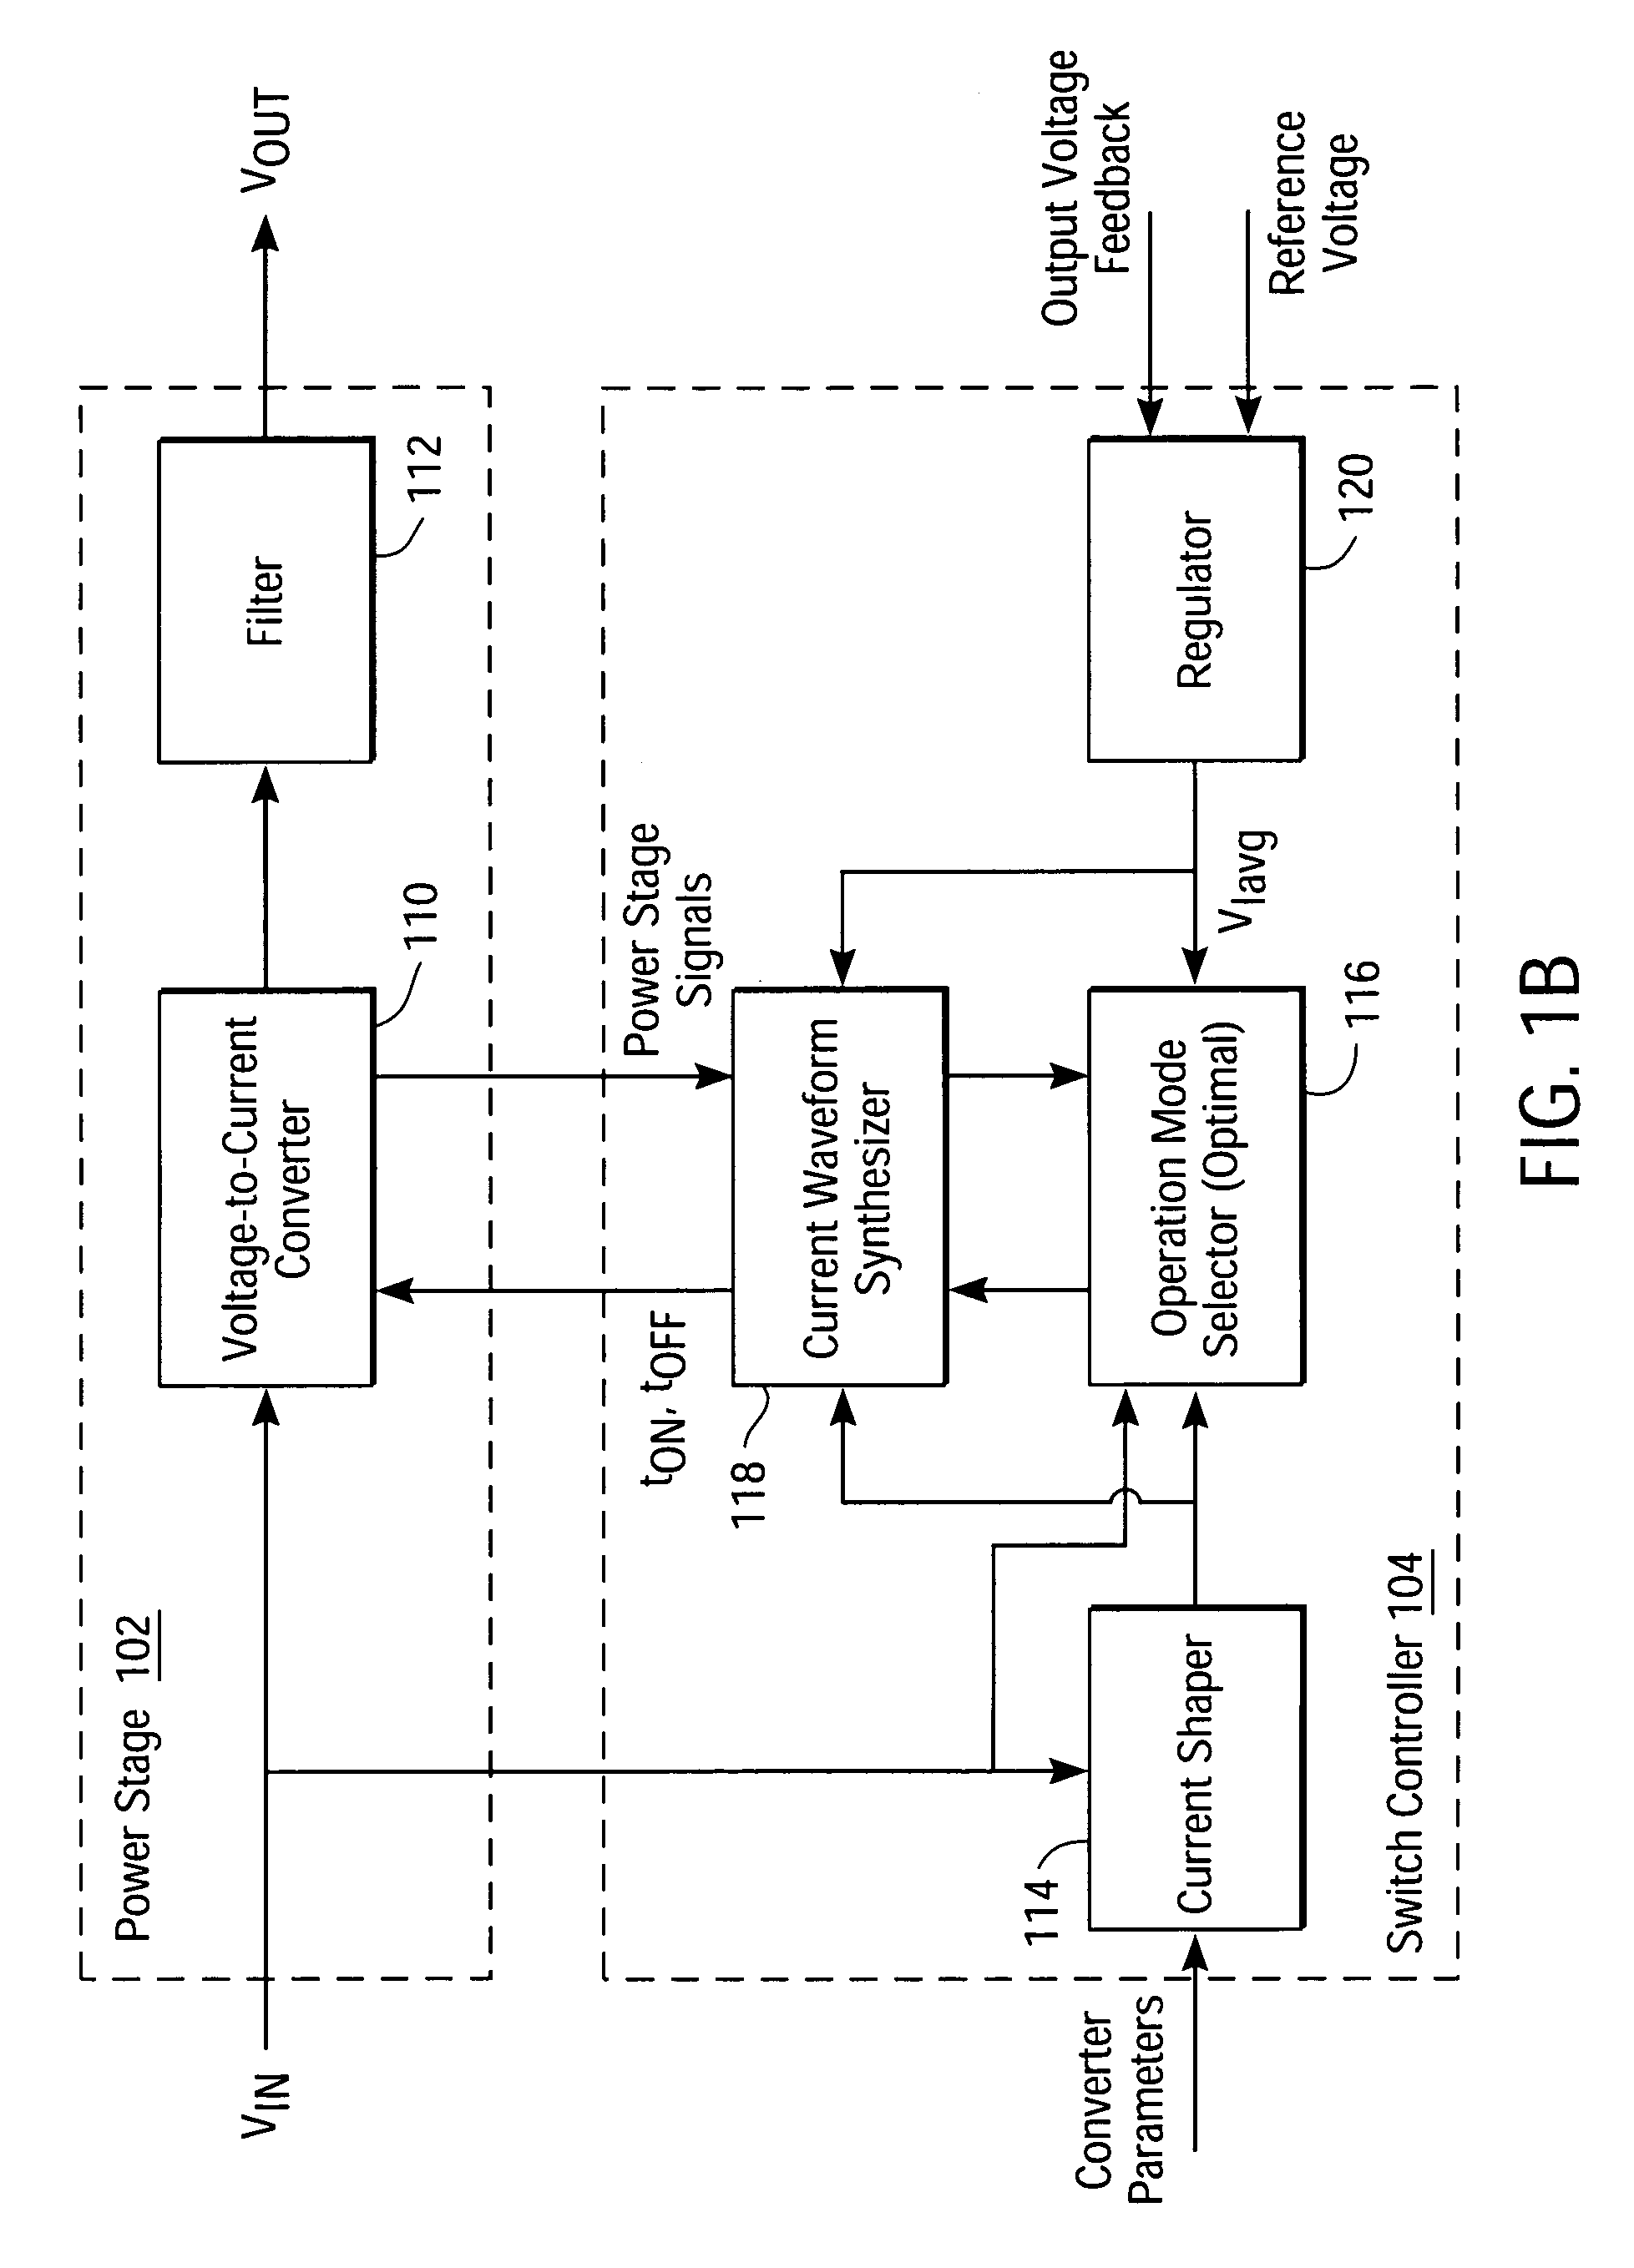 System and method for input current shaping in a power converter